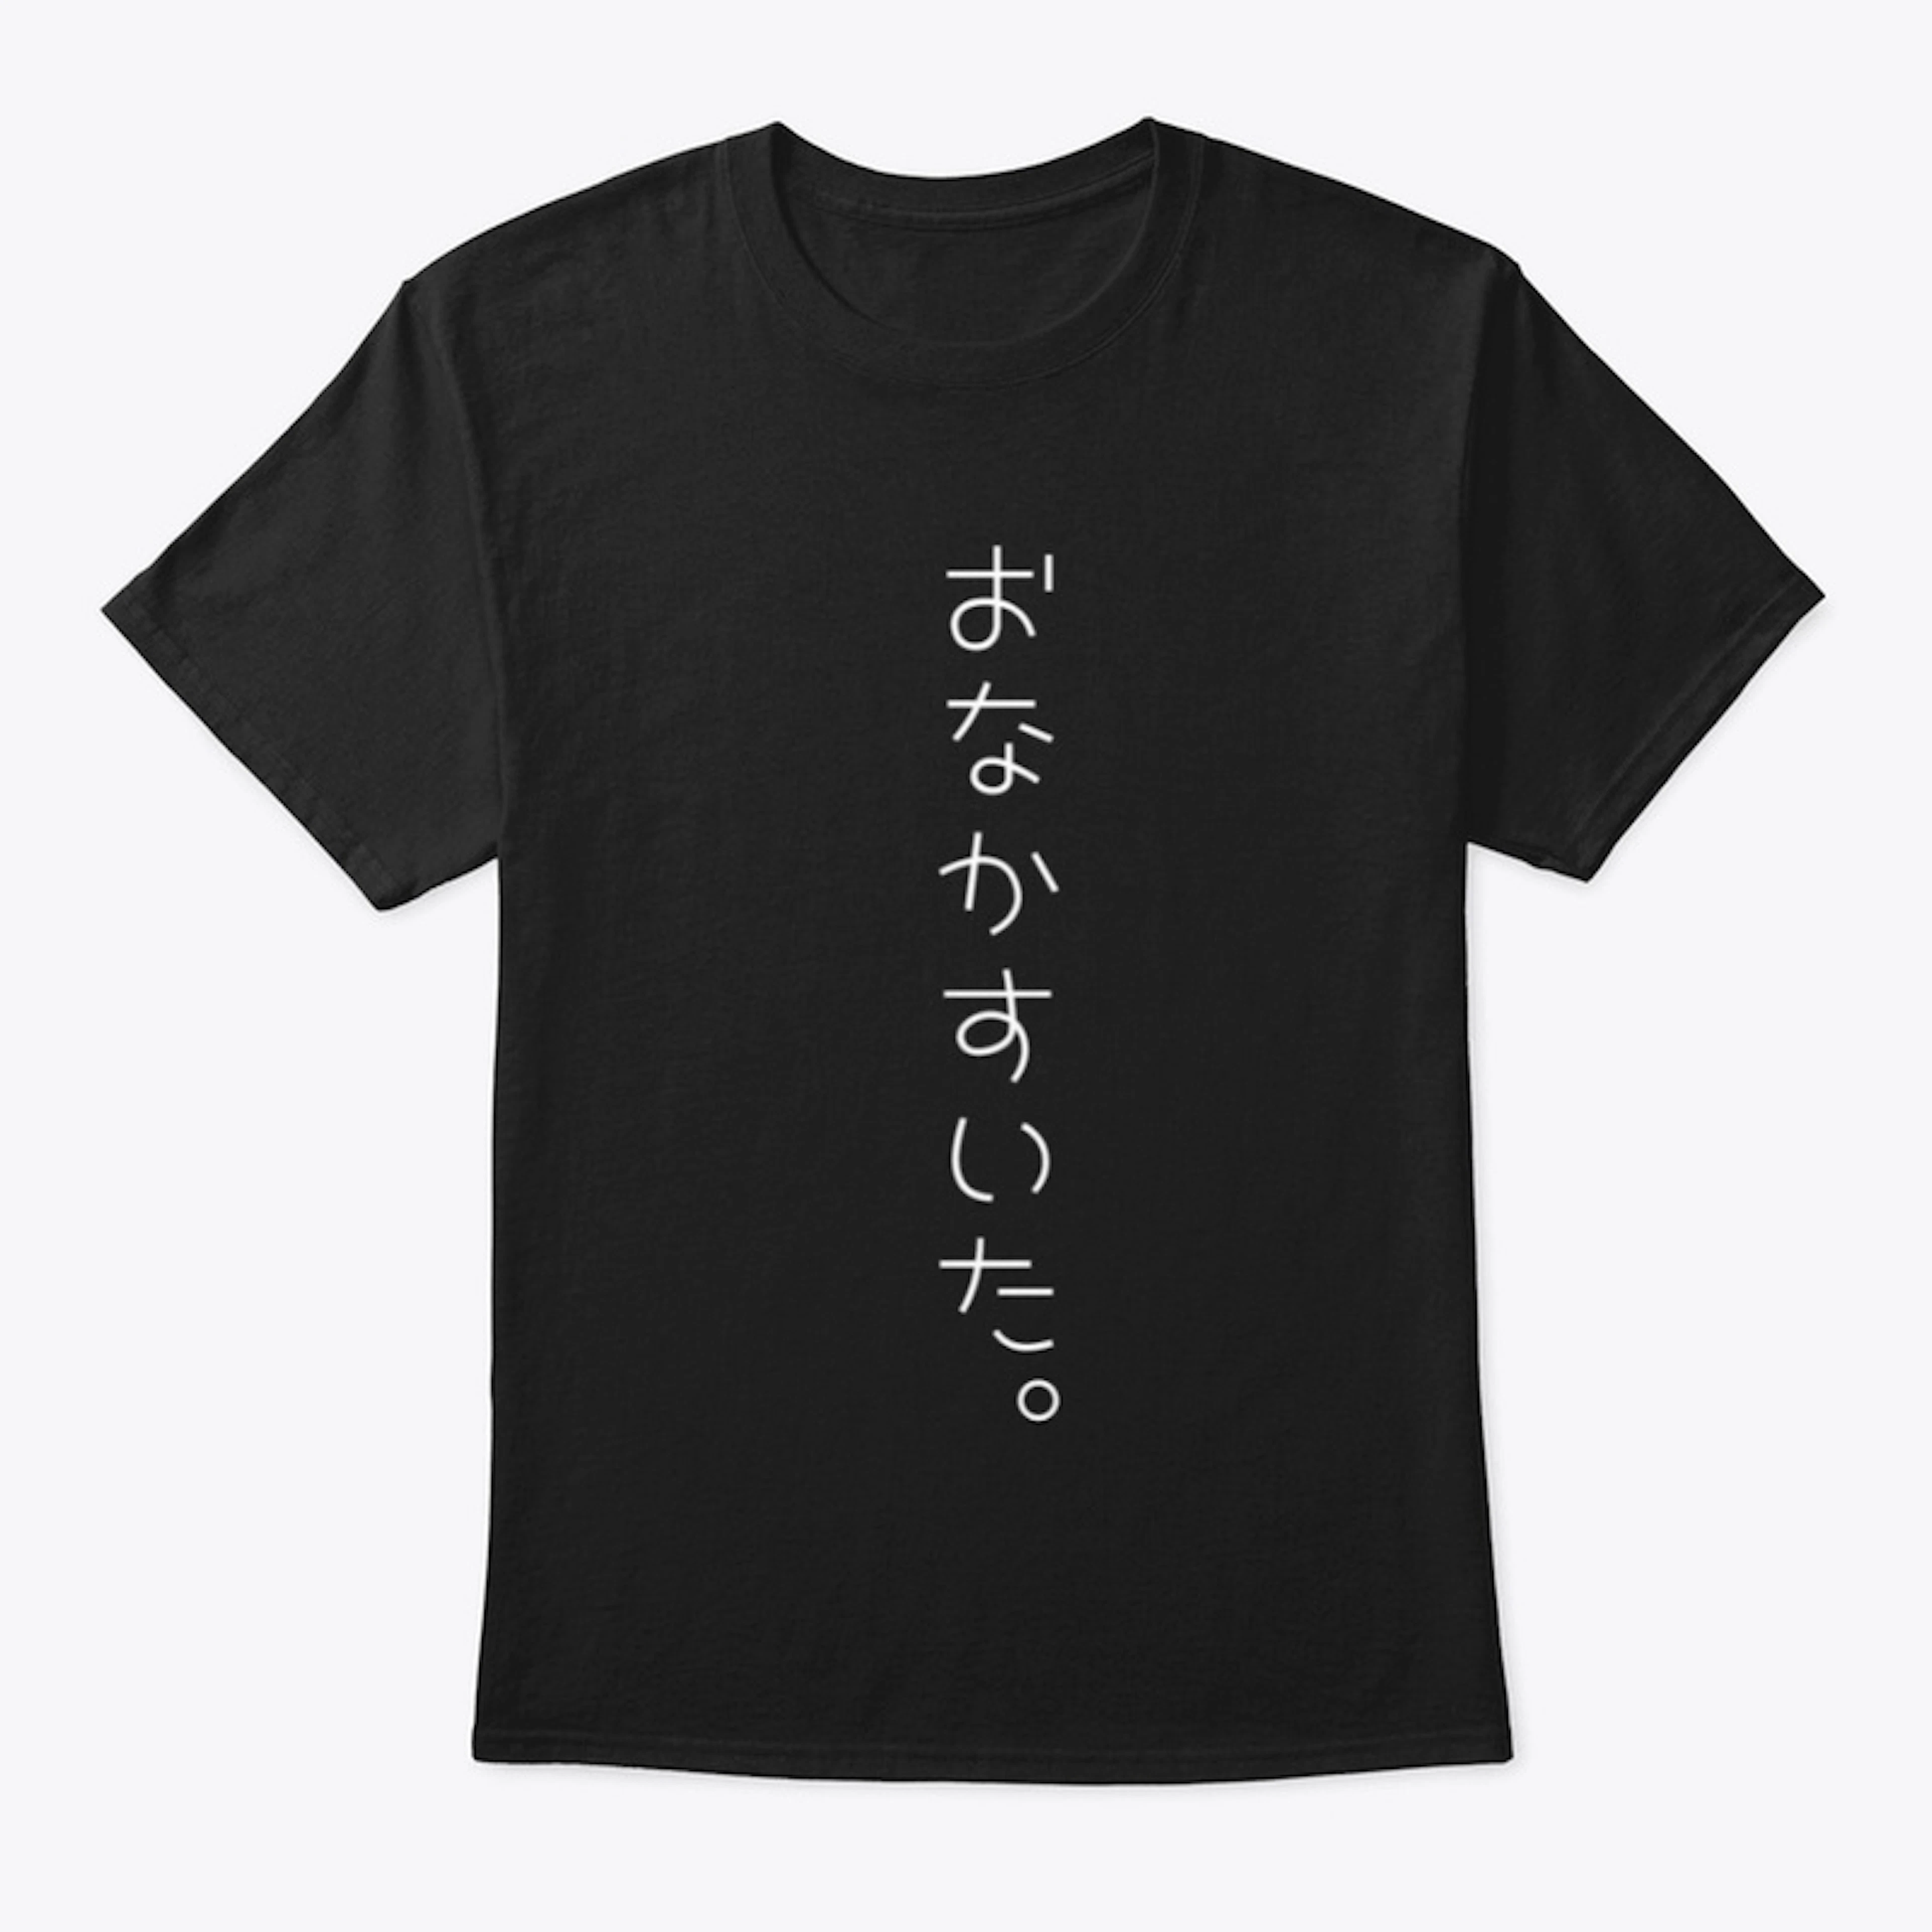 I'm hungry in Japanese T-shirt